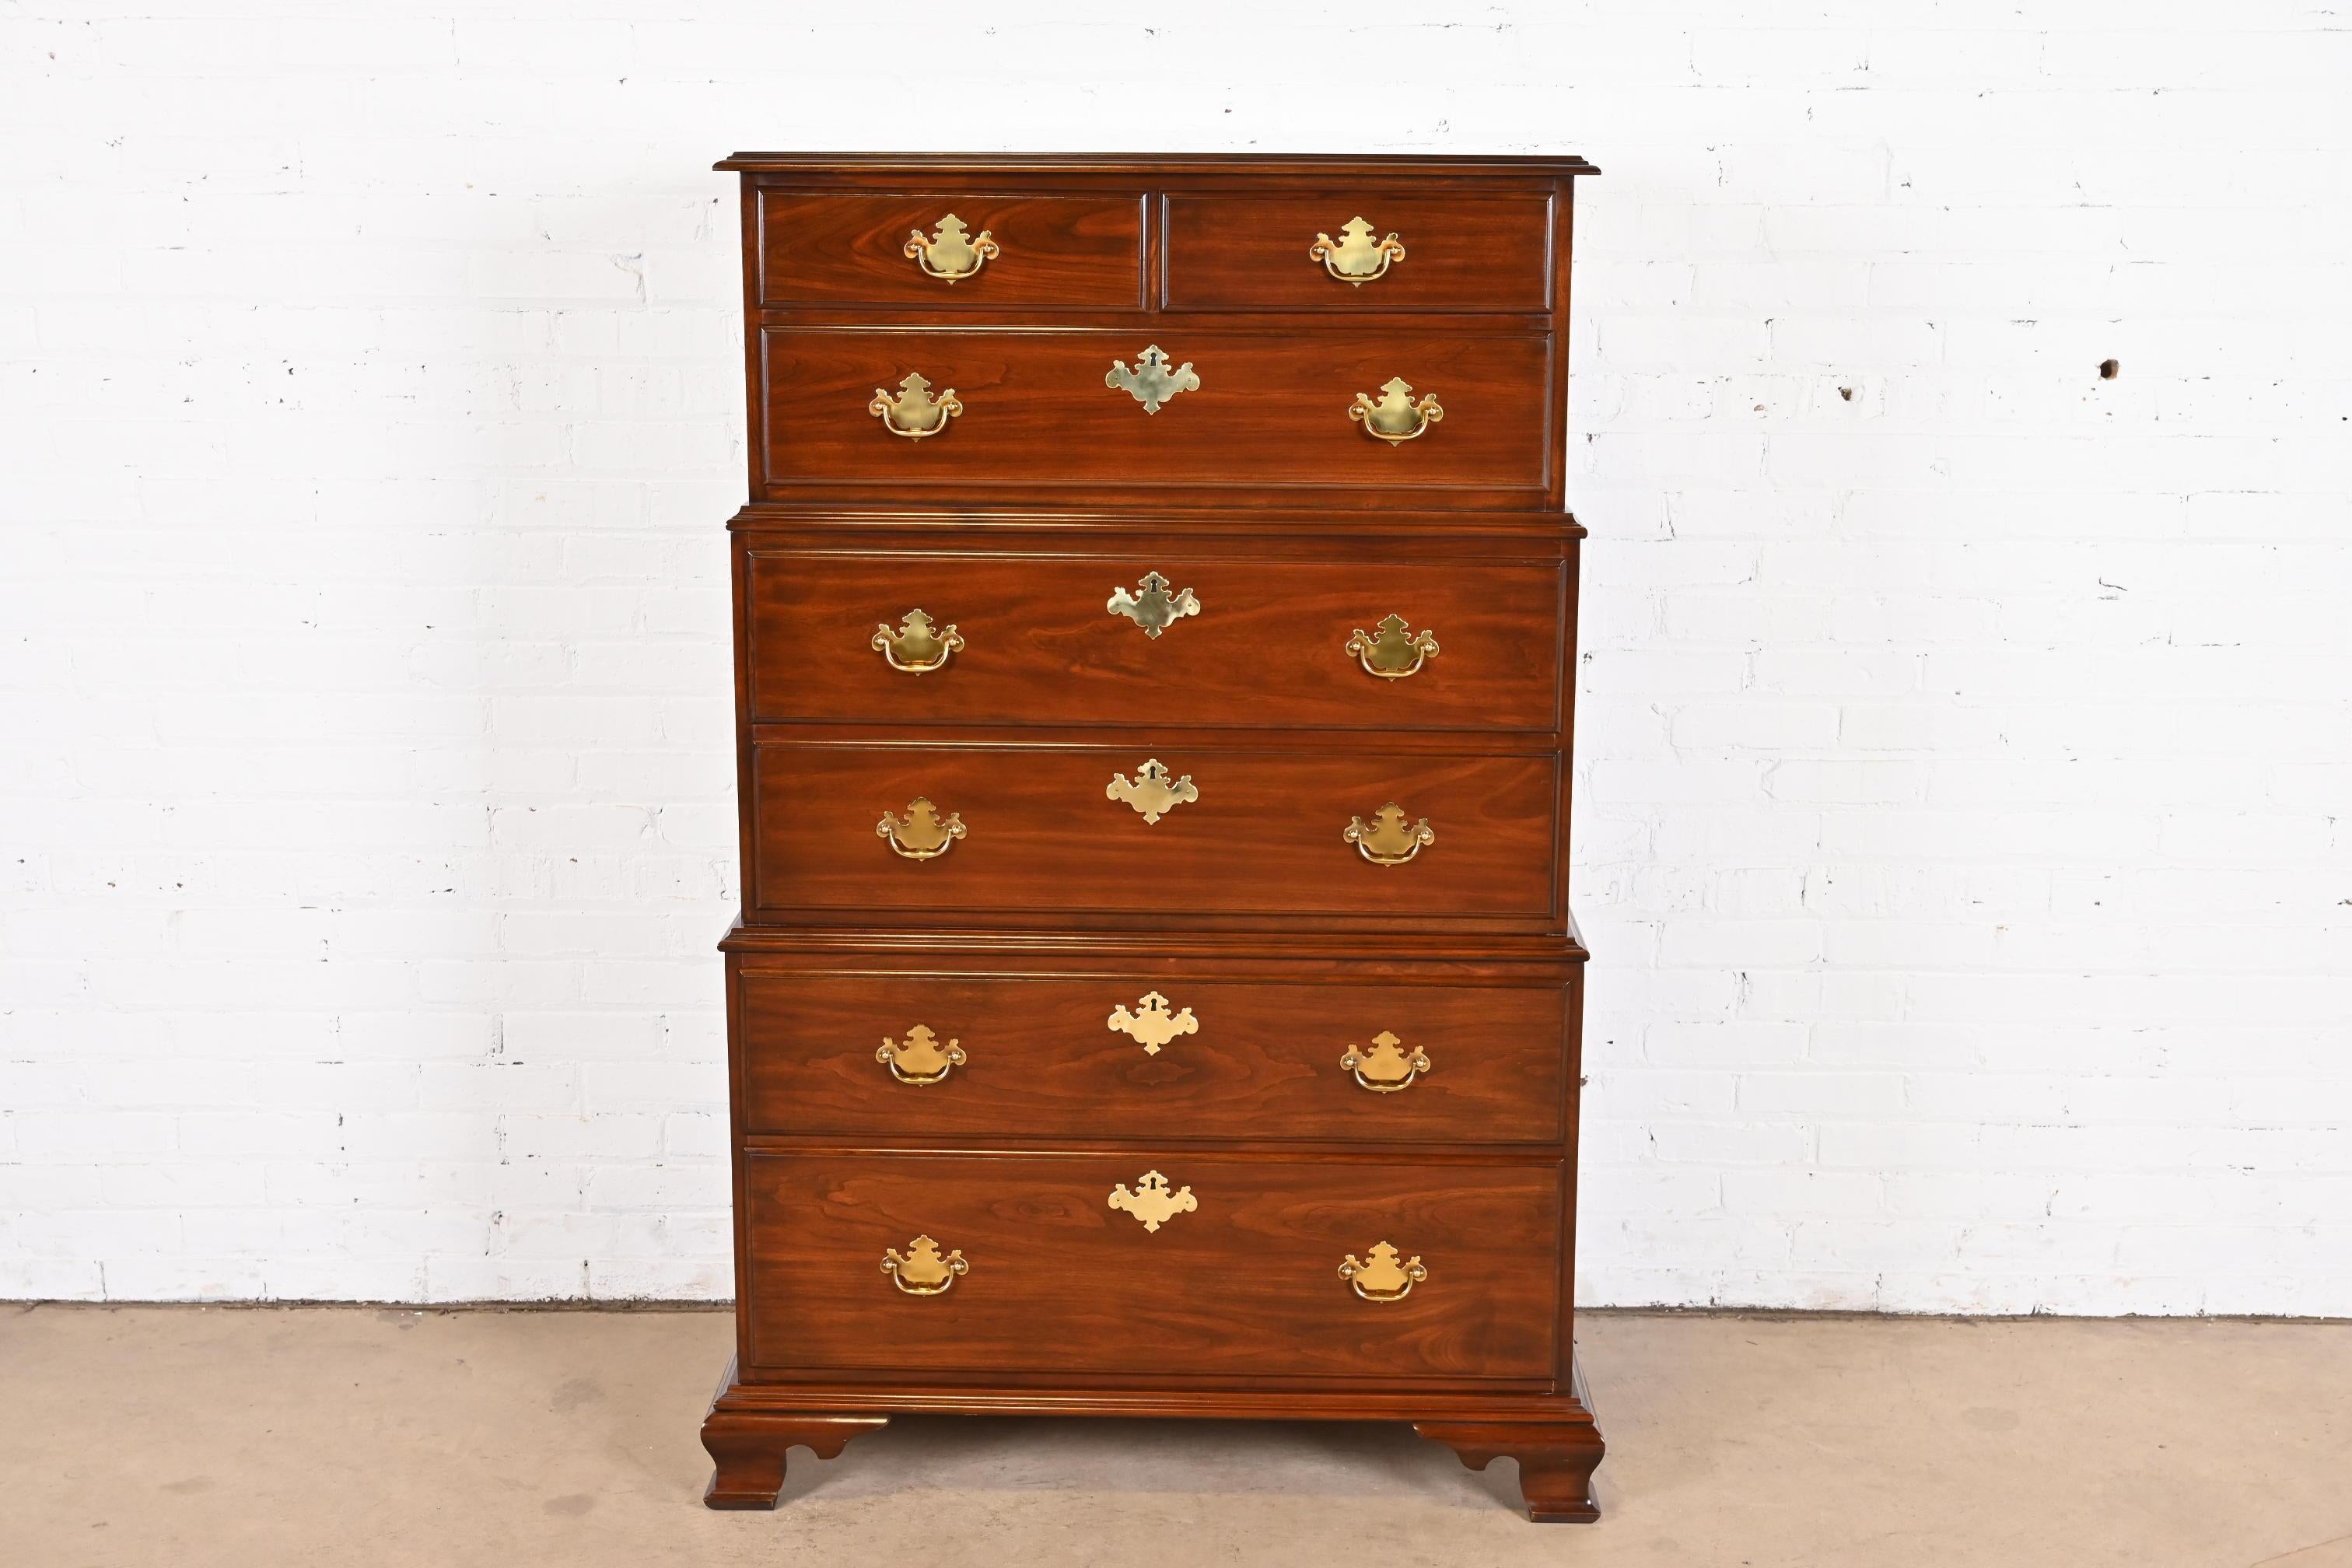 An exceptional Georgian or Chippendale style triple chest-on-chest seven-drawer highboy dresser

By Harden Furniture

USA, Late 20th century

Solid cherry wood, with original brass hardware.

Measures: 39.25